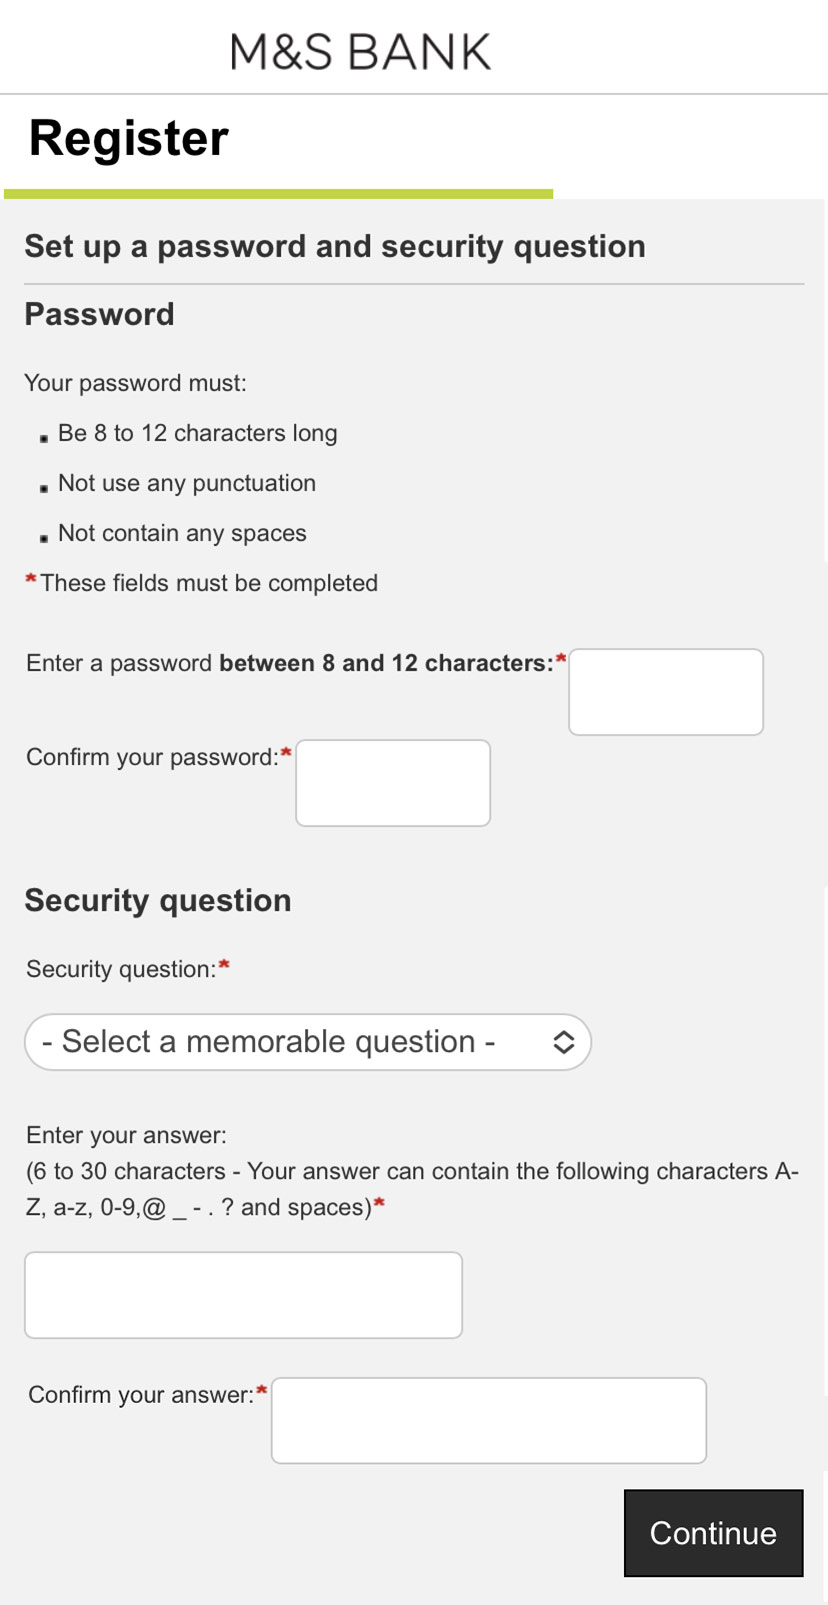 Internet Banking registration set up password and security question screen.